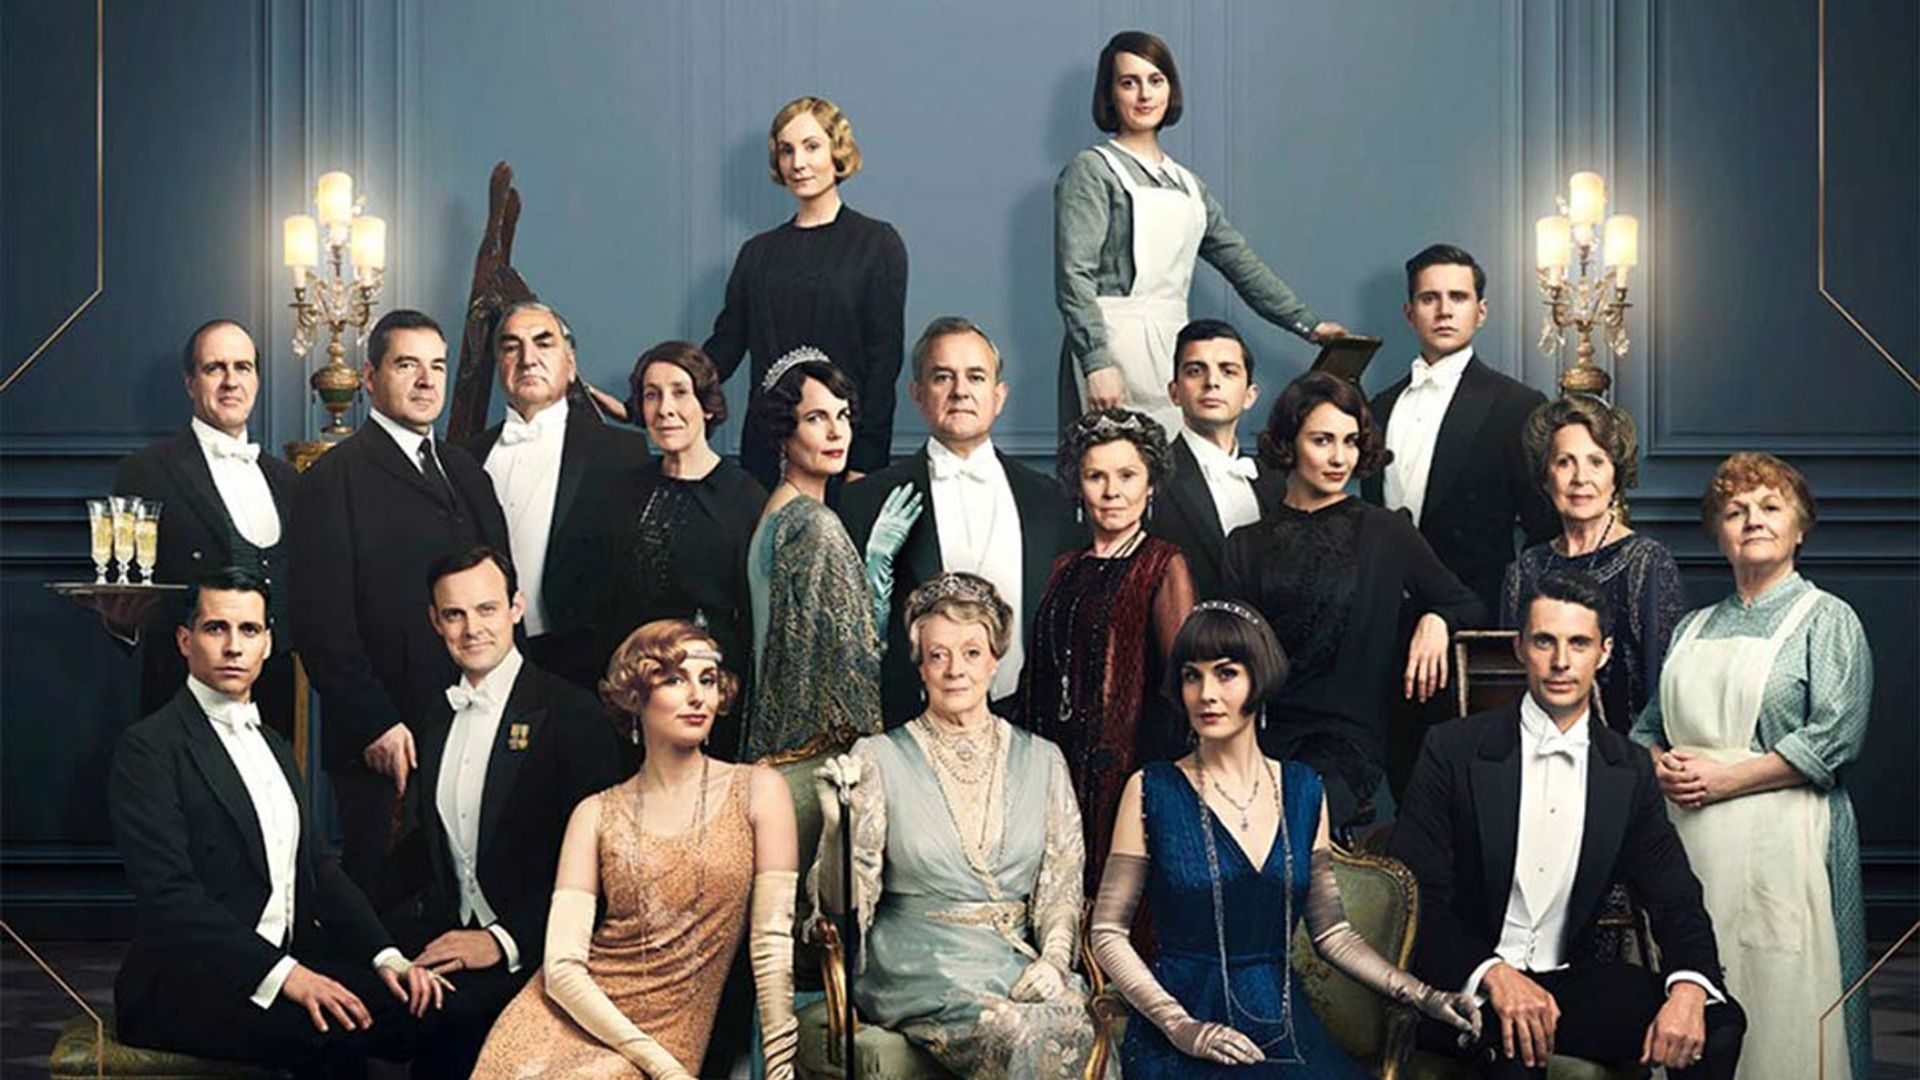 Where are the cast of Downton Abbey now?